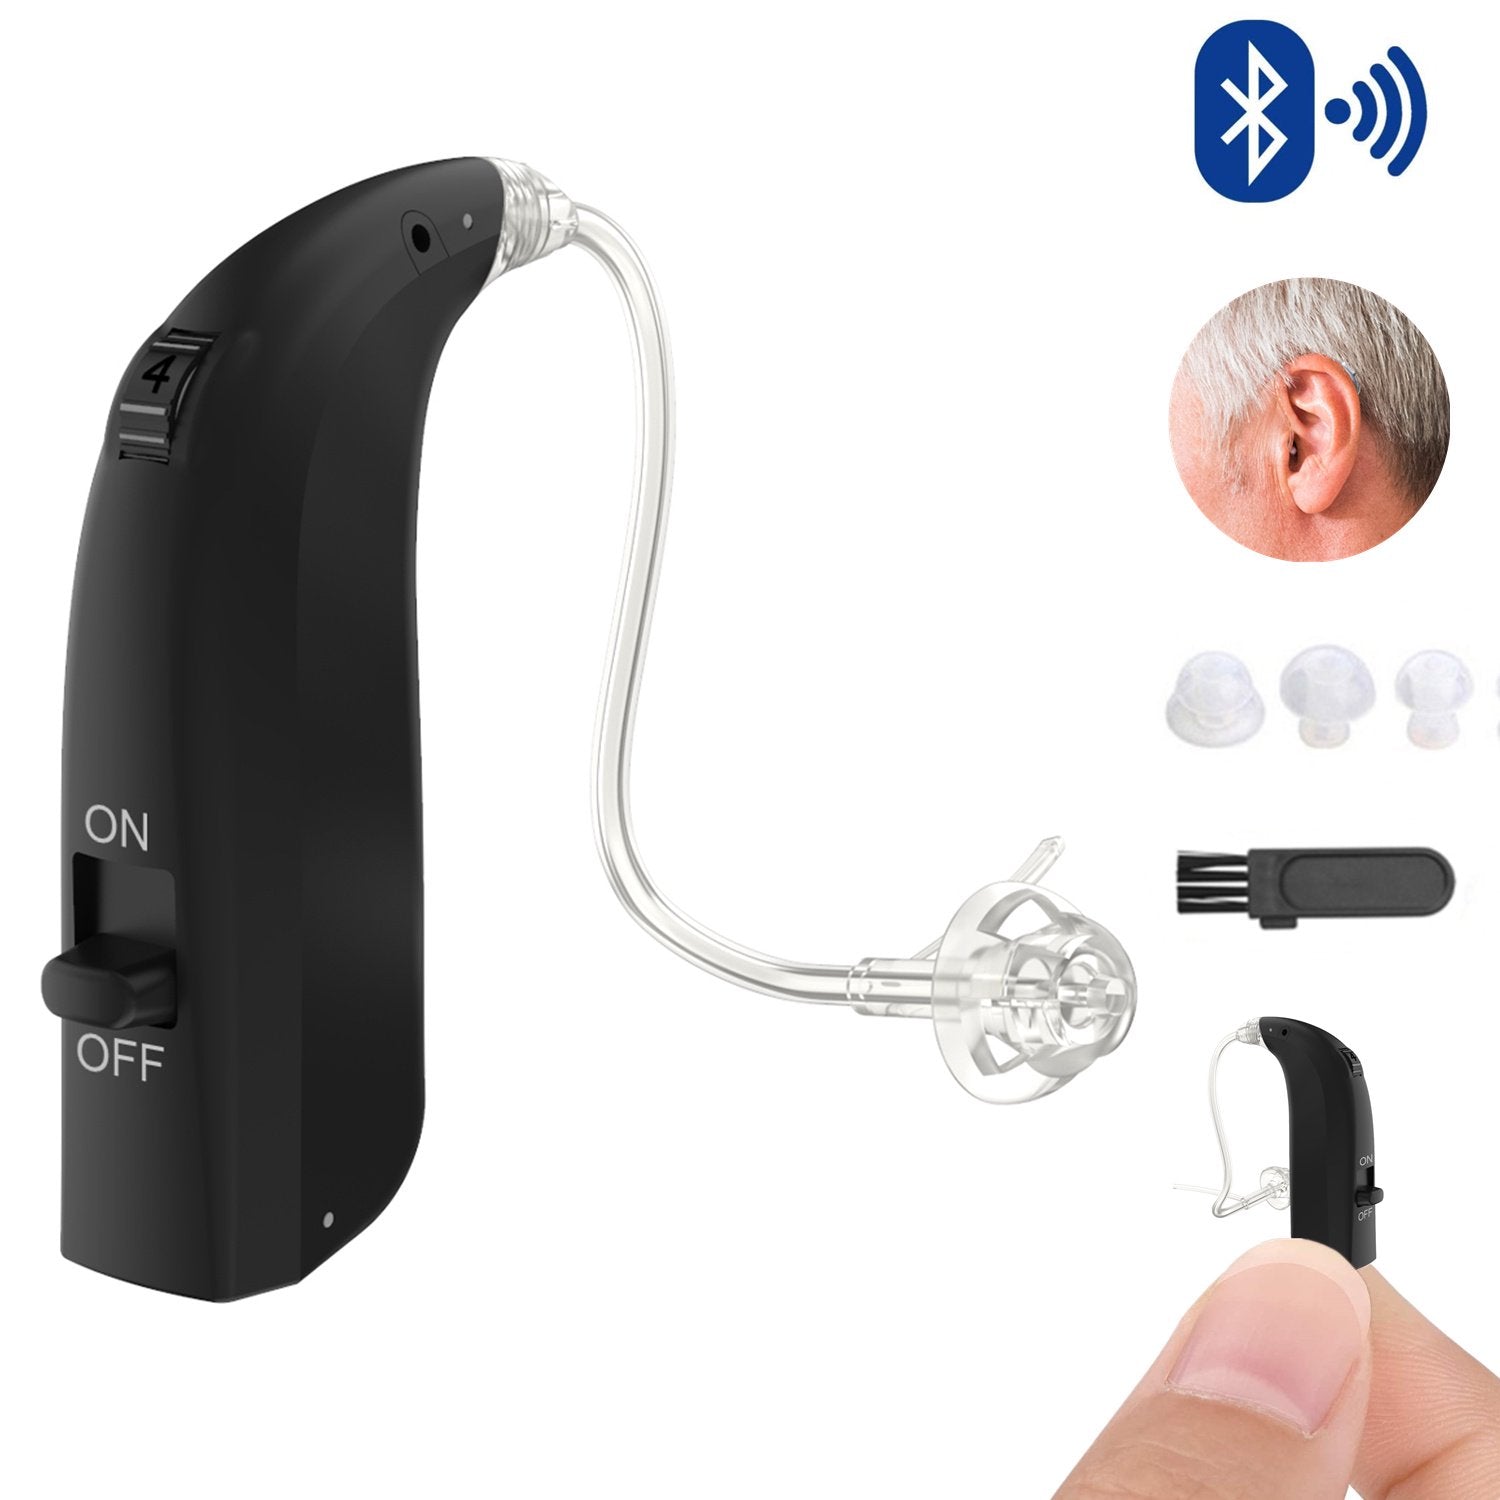 Doosl Bluetooth Hearing Aids, USB Rechargeable Hearing Amplifier with Noise Cancelling & 3 Adjustable Modes, Personal Hearing Assist for Seniors Adults, Black, 1 Pack